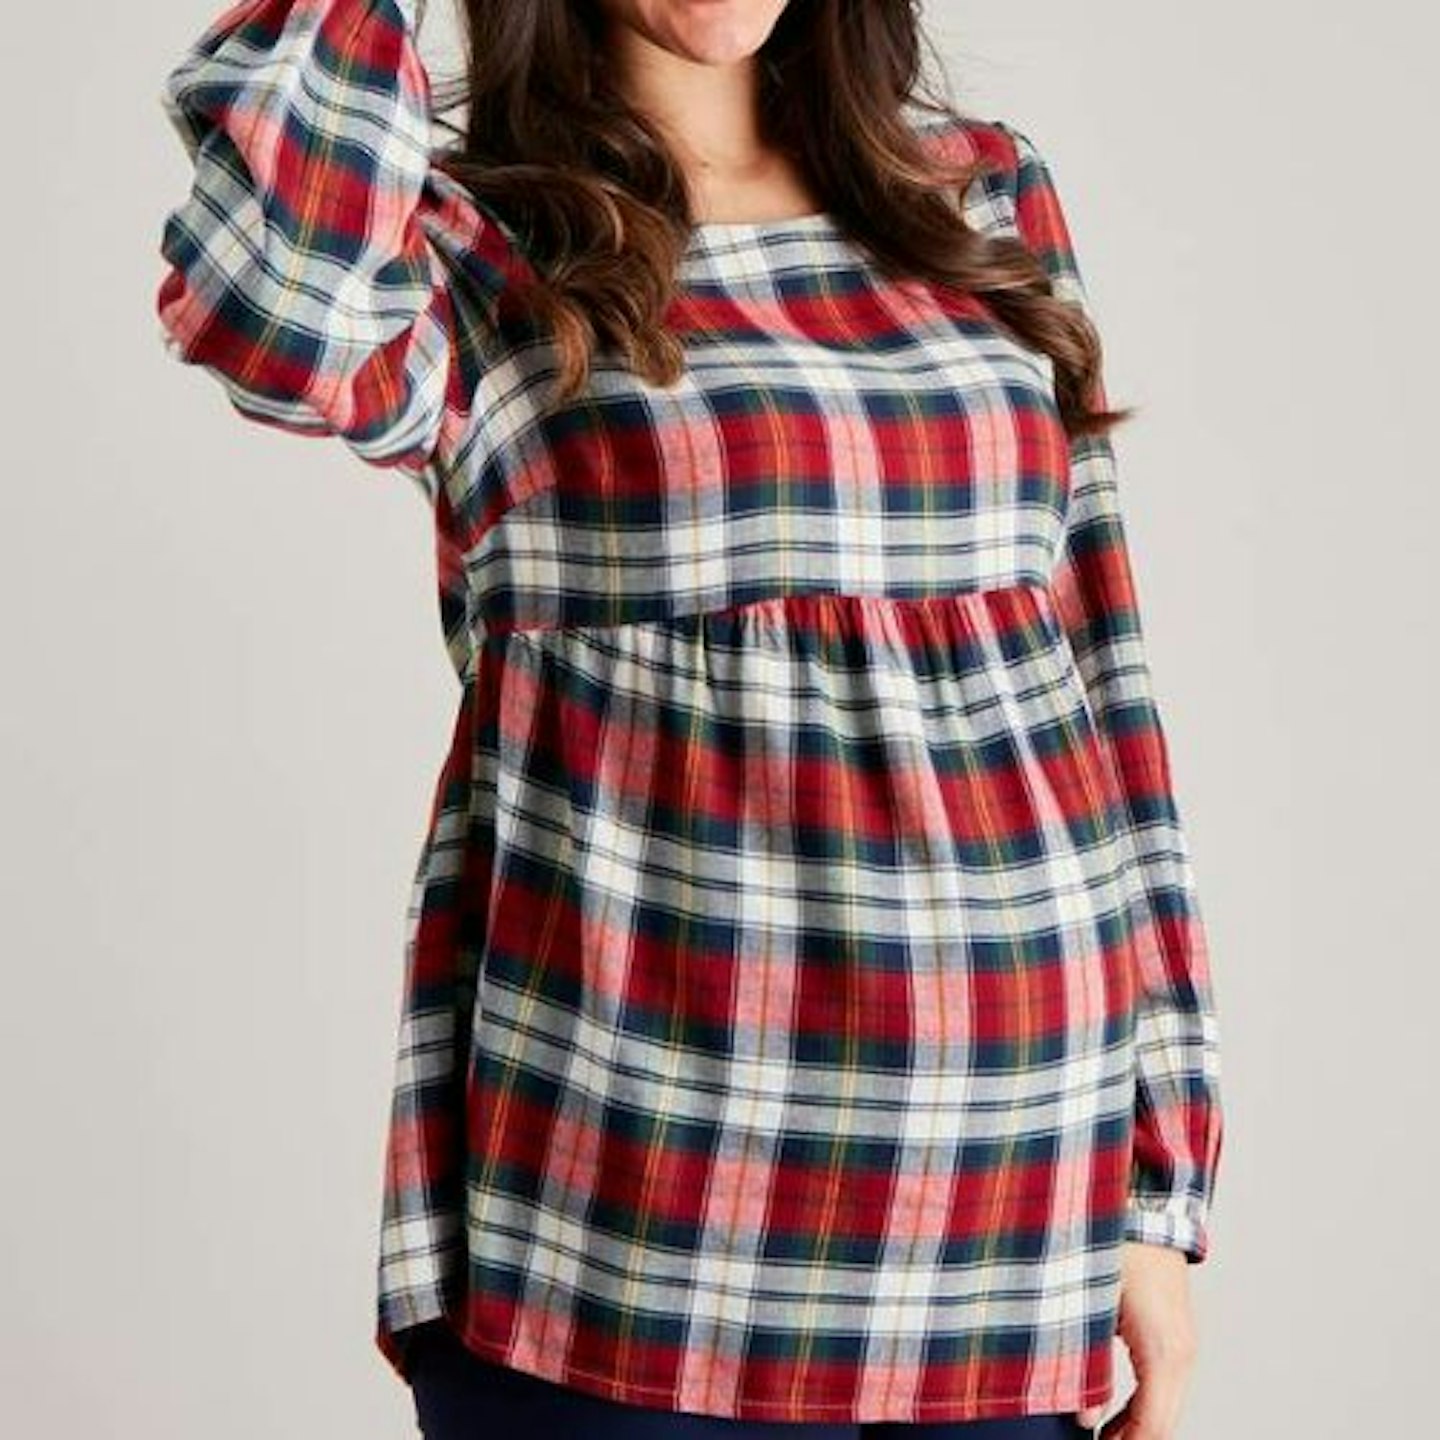 Tu MATERNITY Red Tartan Woven Smock Top - plus size maternity clothes